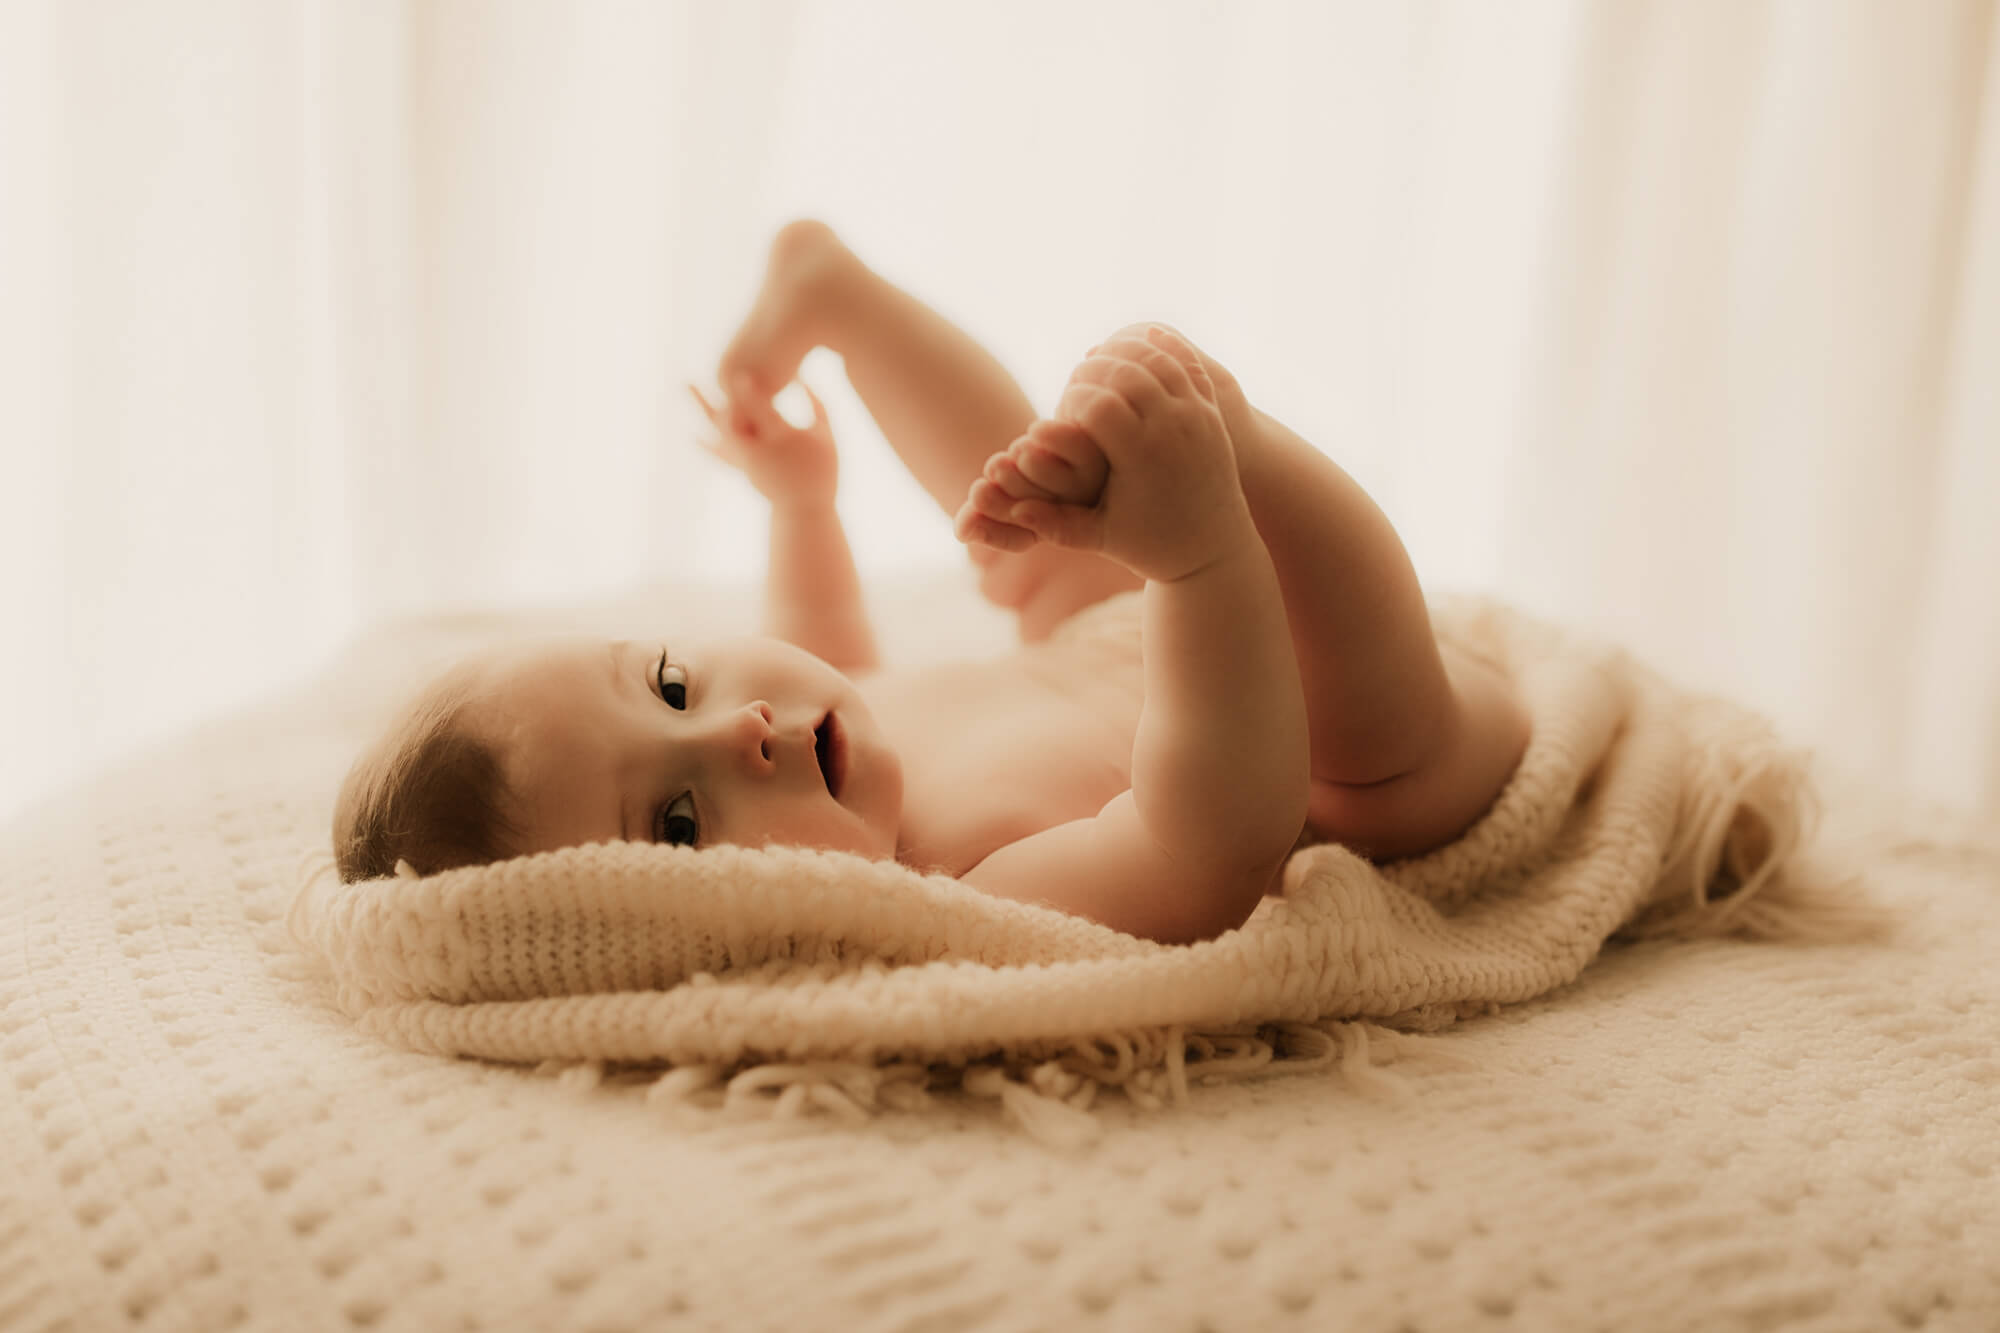 Swaddle OKC is a baby boutique located in the heart of Oklahoma City that offers a variety of baby clothing styles.